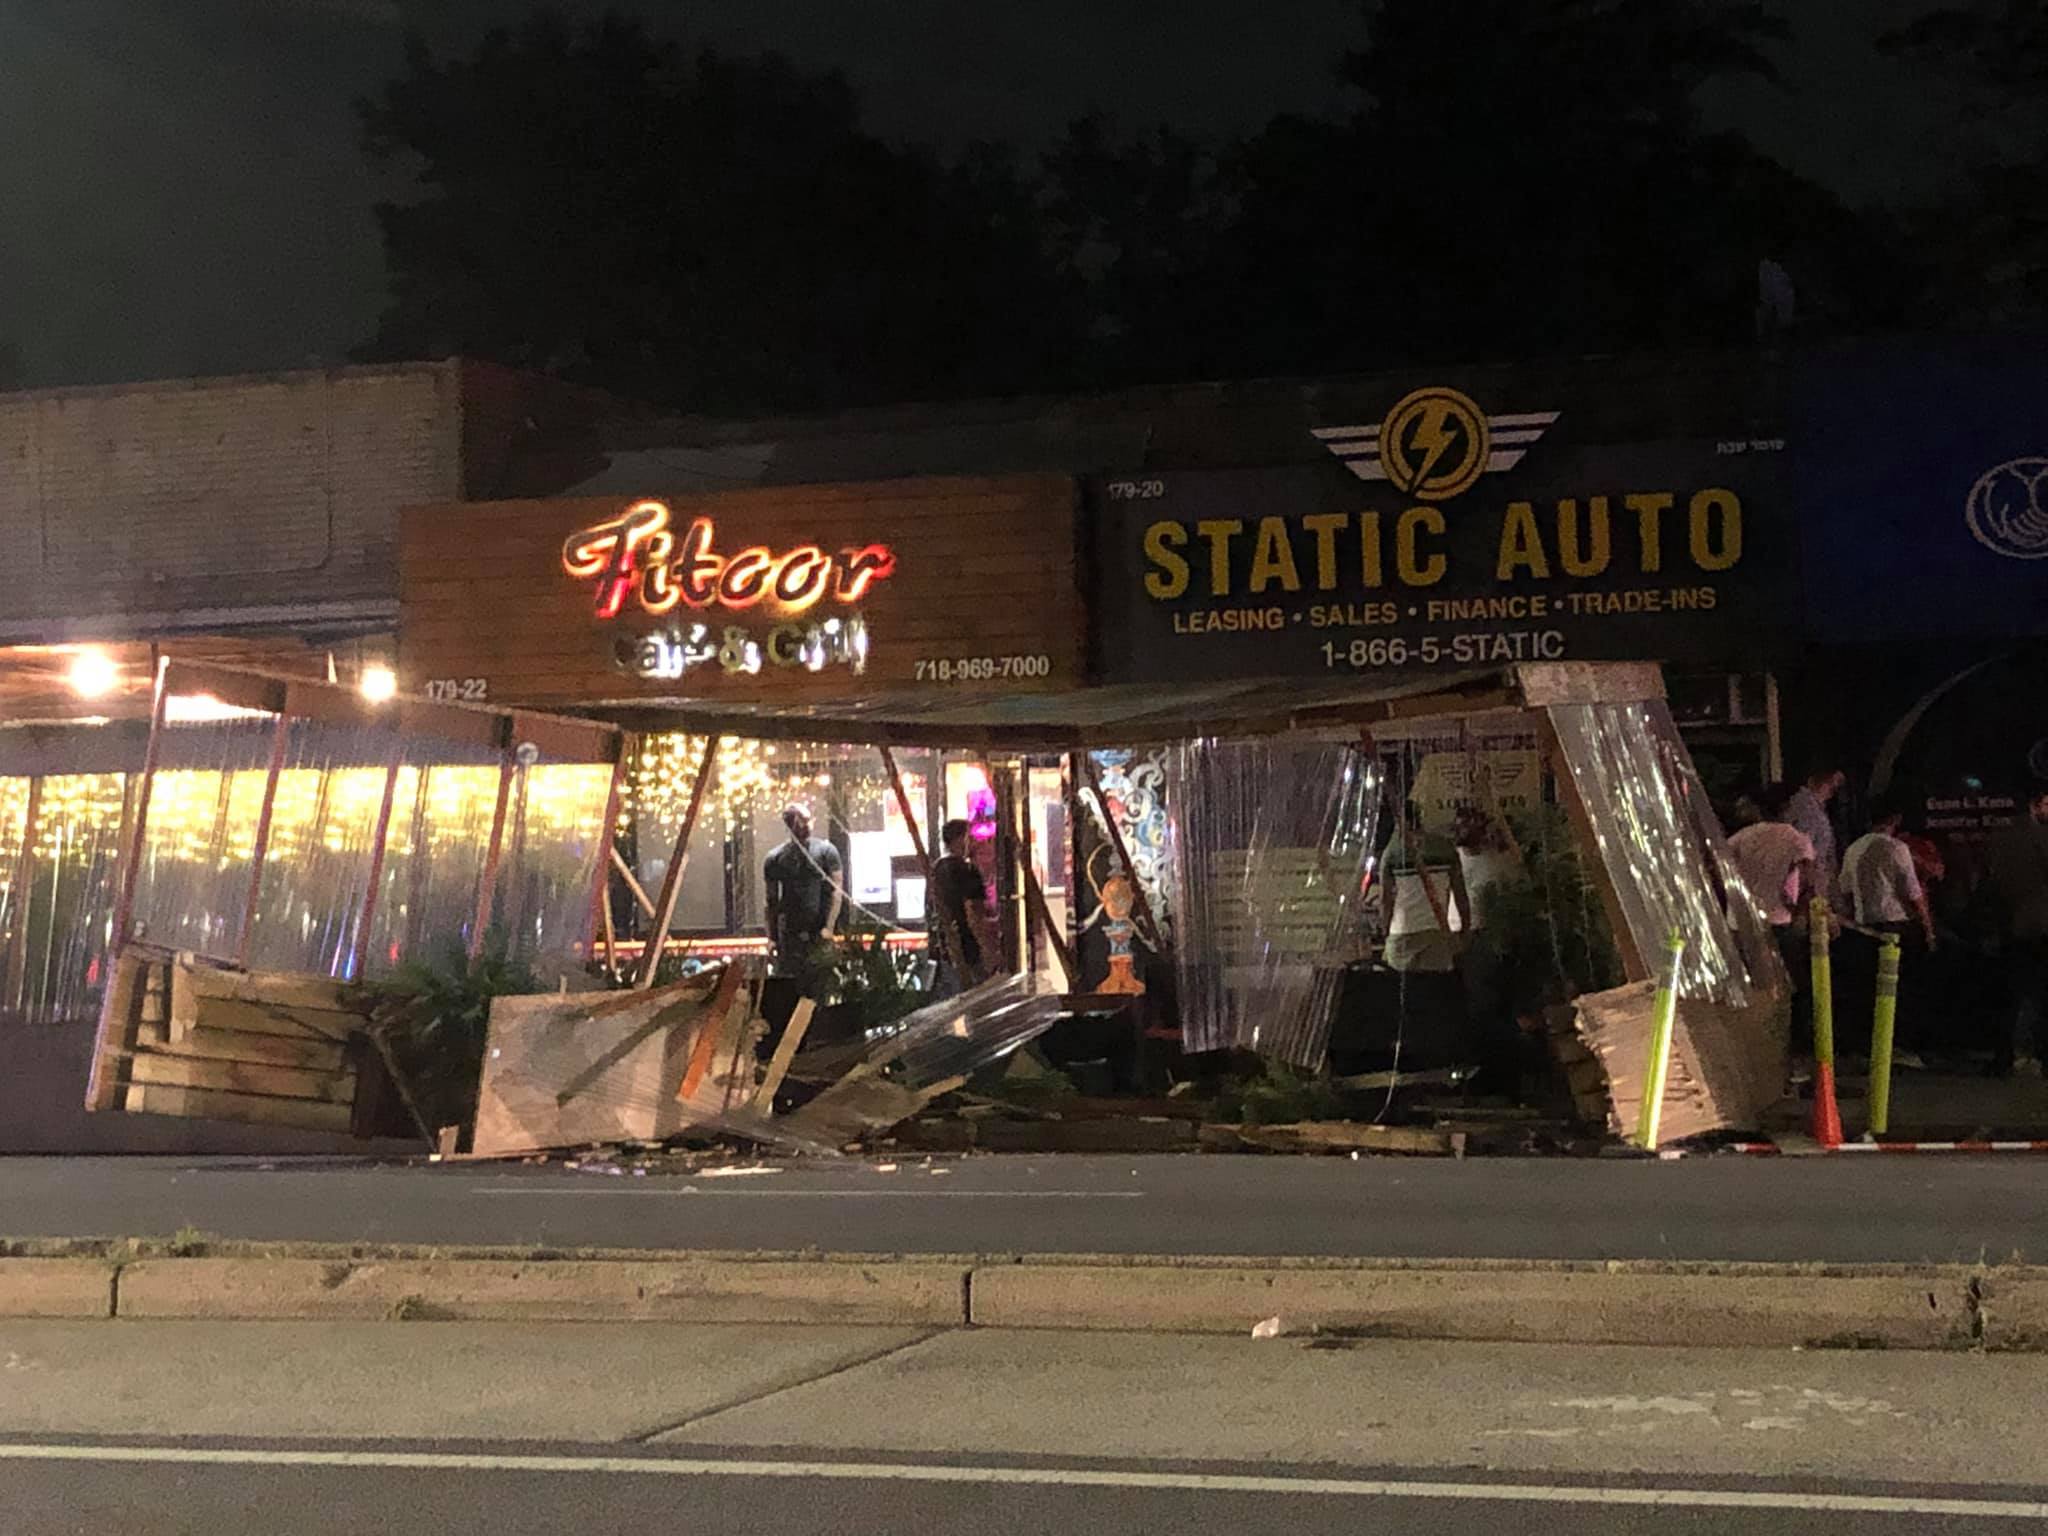 Store front damage and outdoor dining destroyed by reckless driving on Union Turnpike and 179 Street in Fresh Meadows.